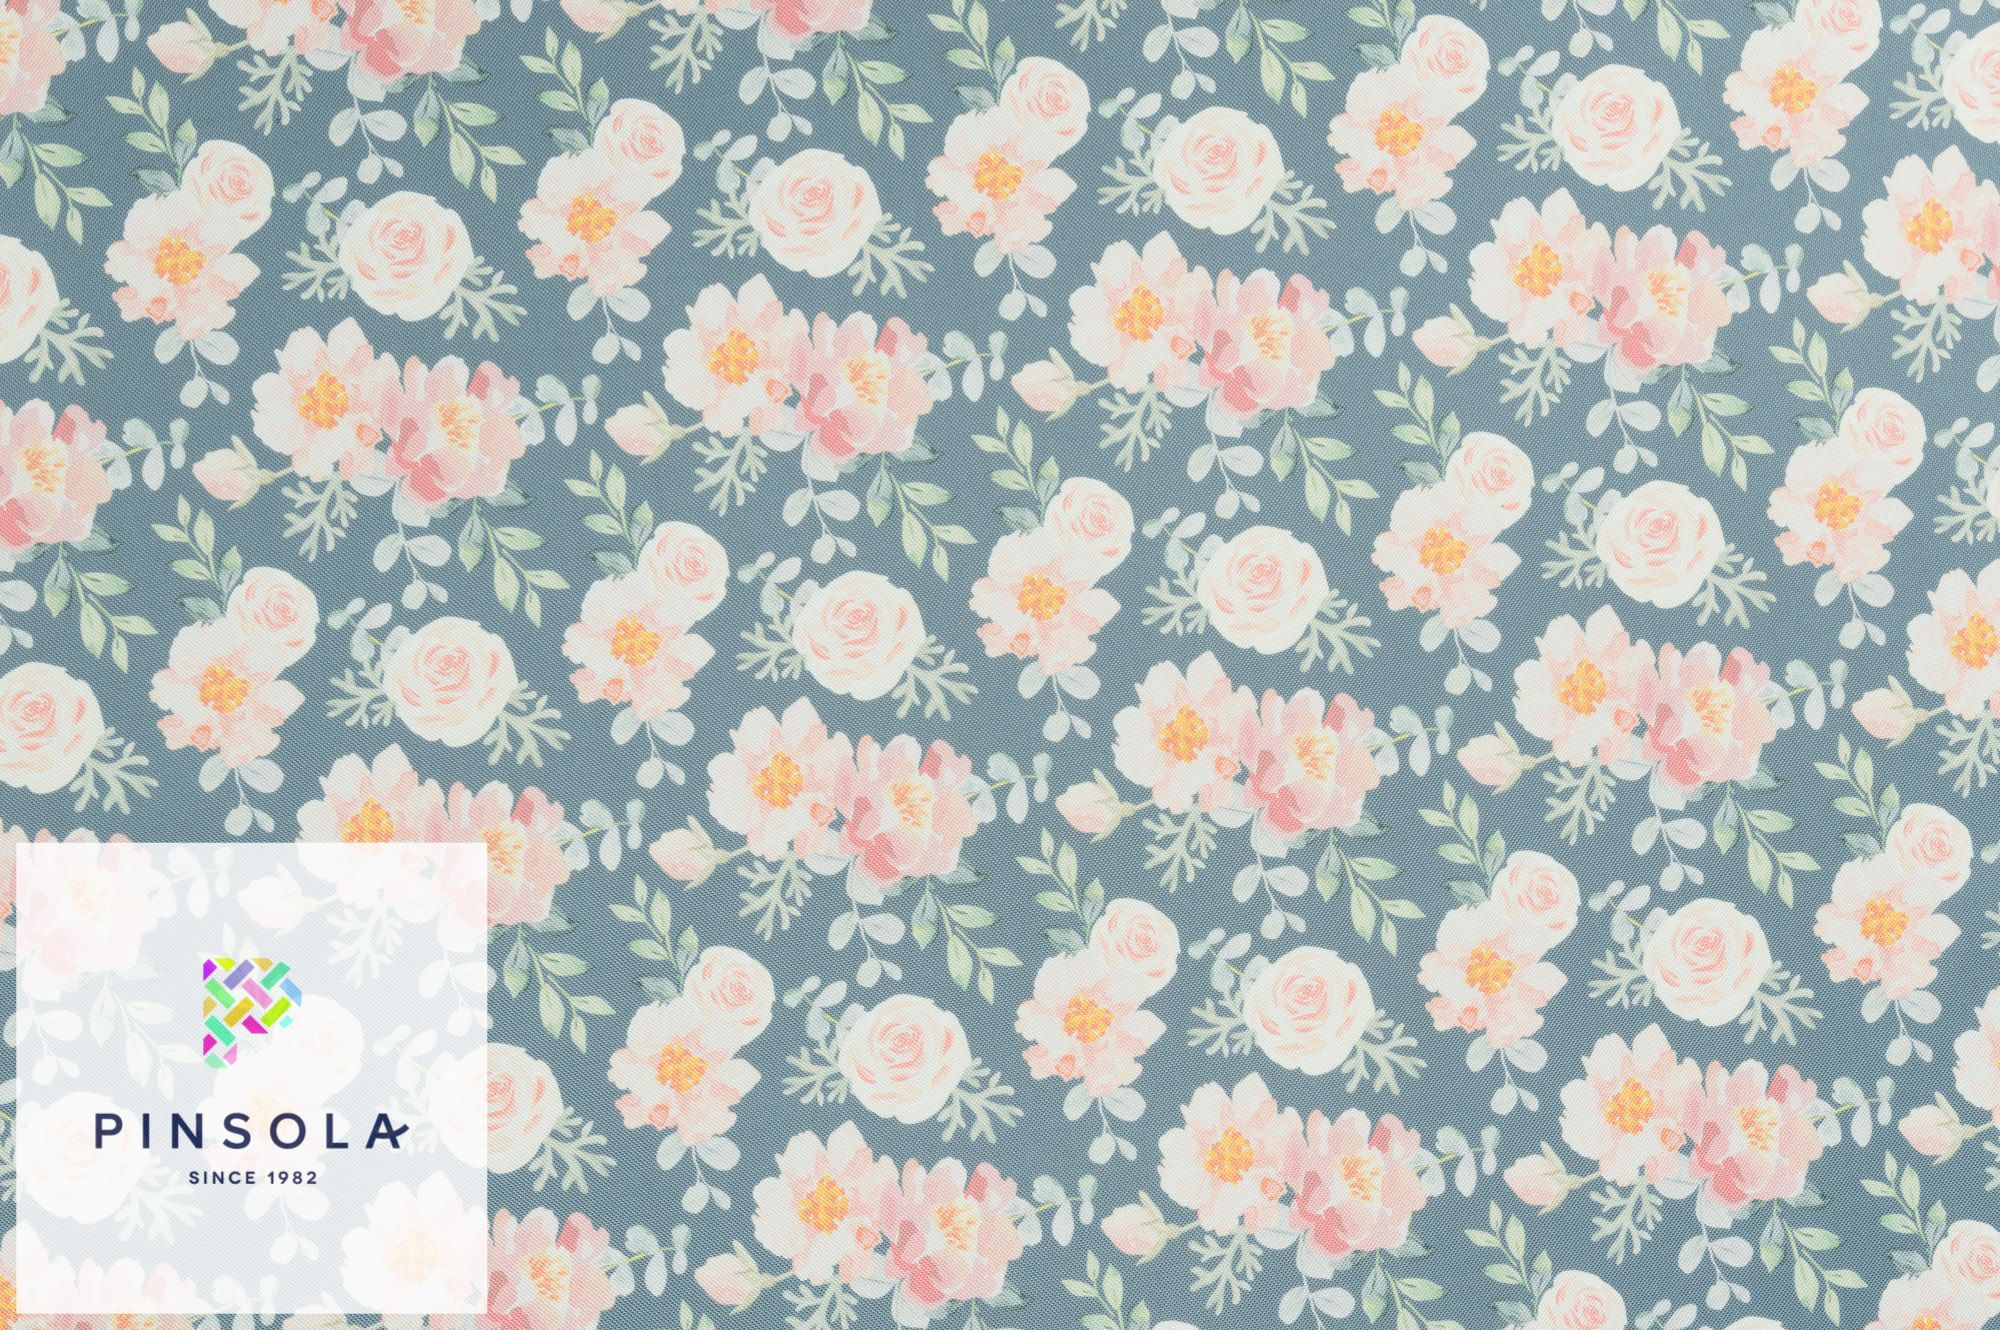 Waterproof fabric OXFORD 200gsm with floral print pattern